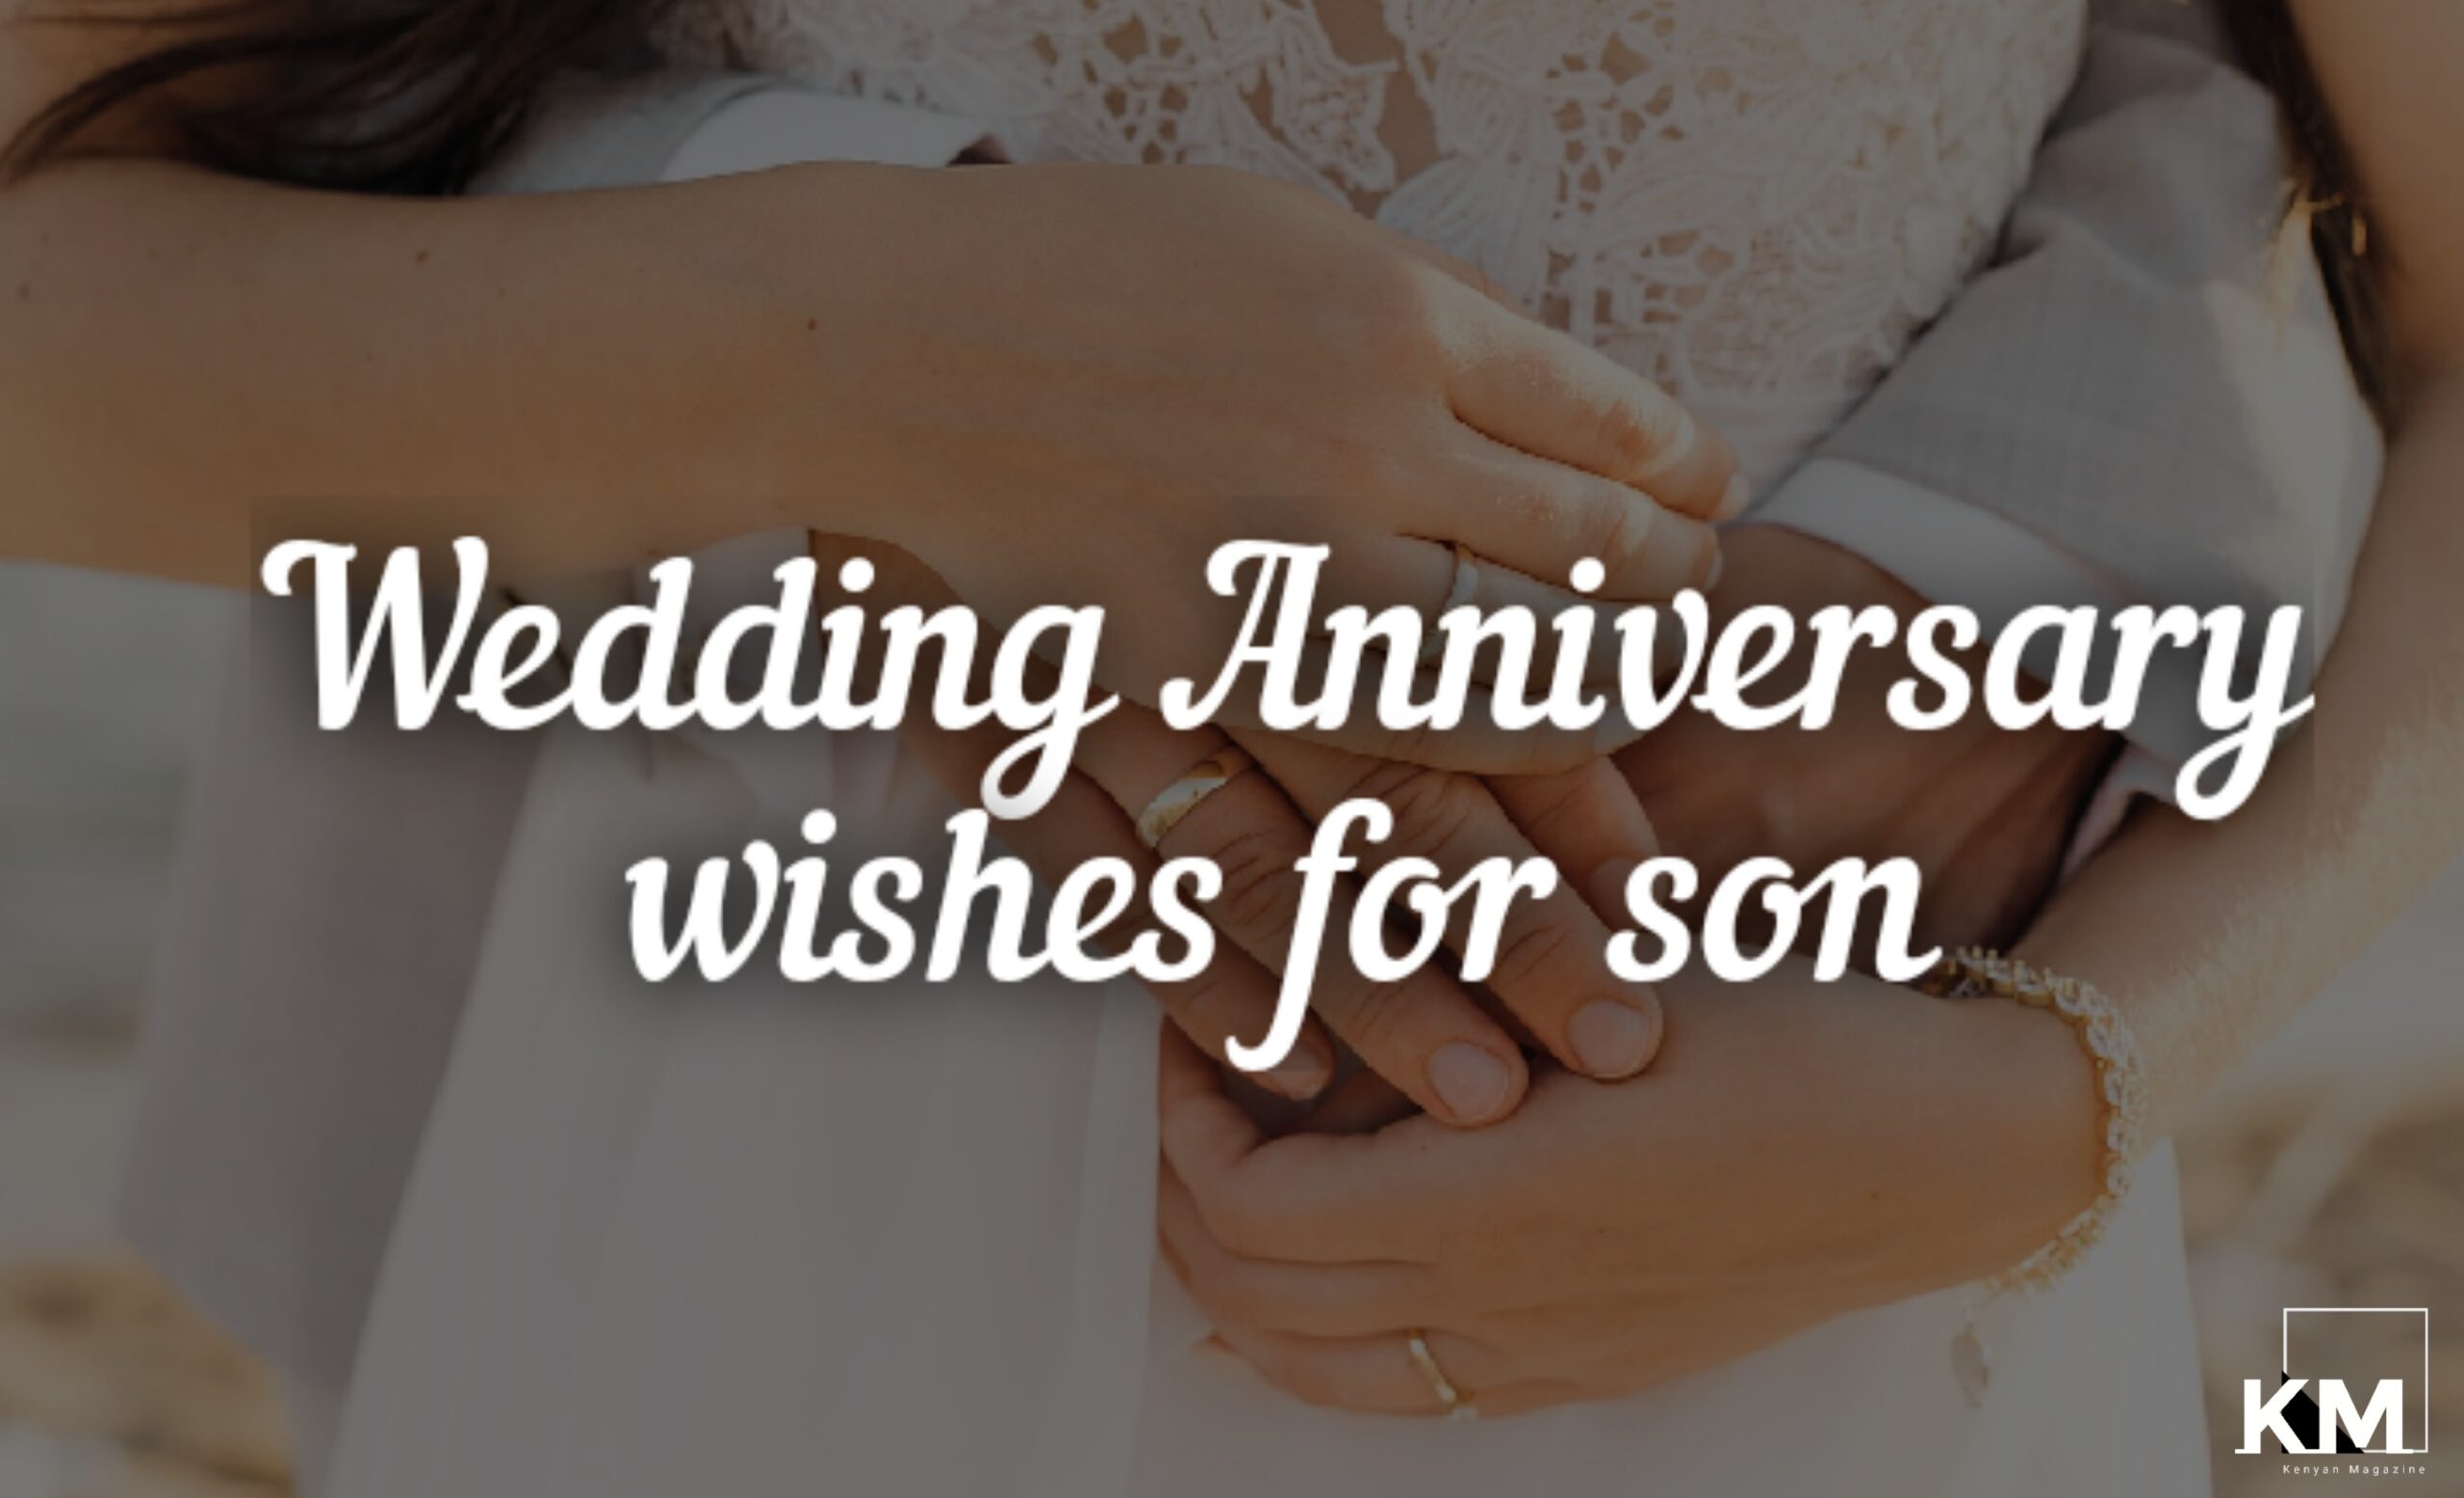 Wedding Anniversary Wishes For Son